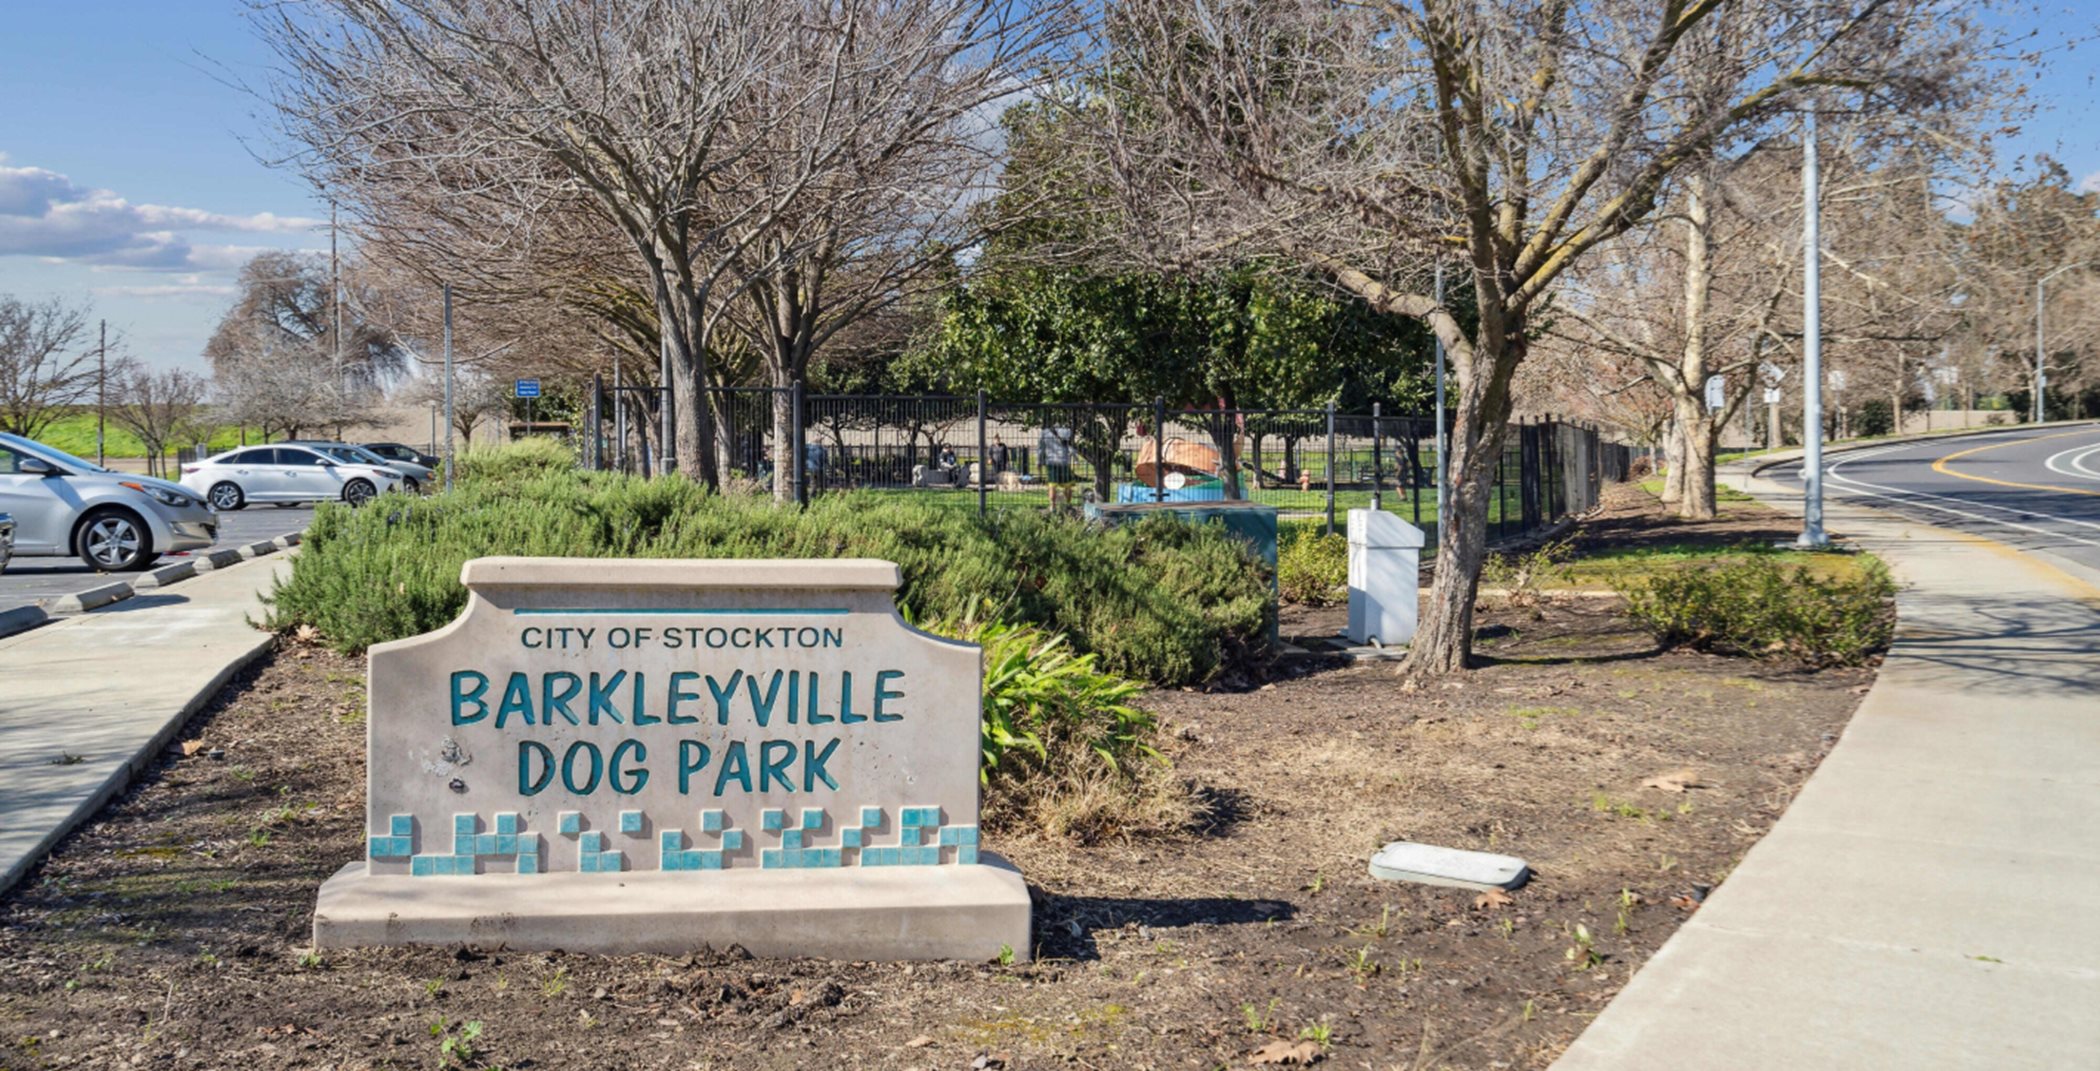 Dog park entry monument next to a paved pathway